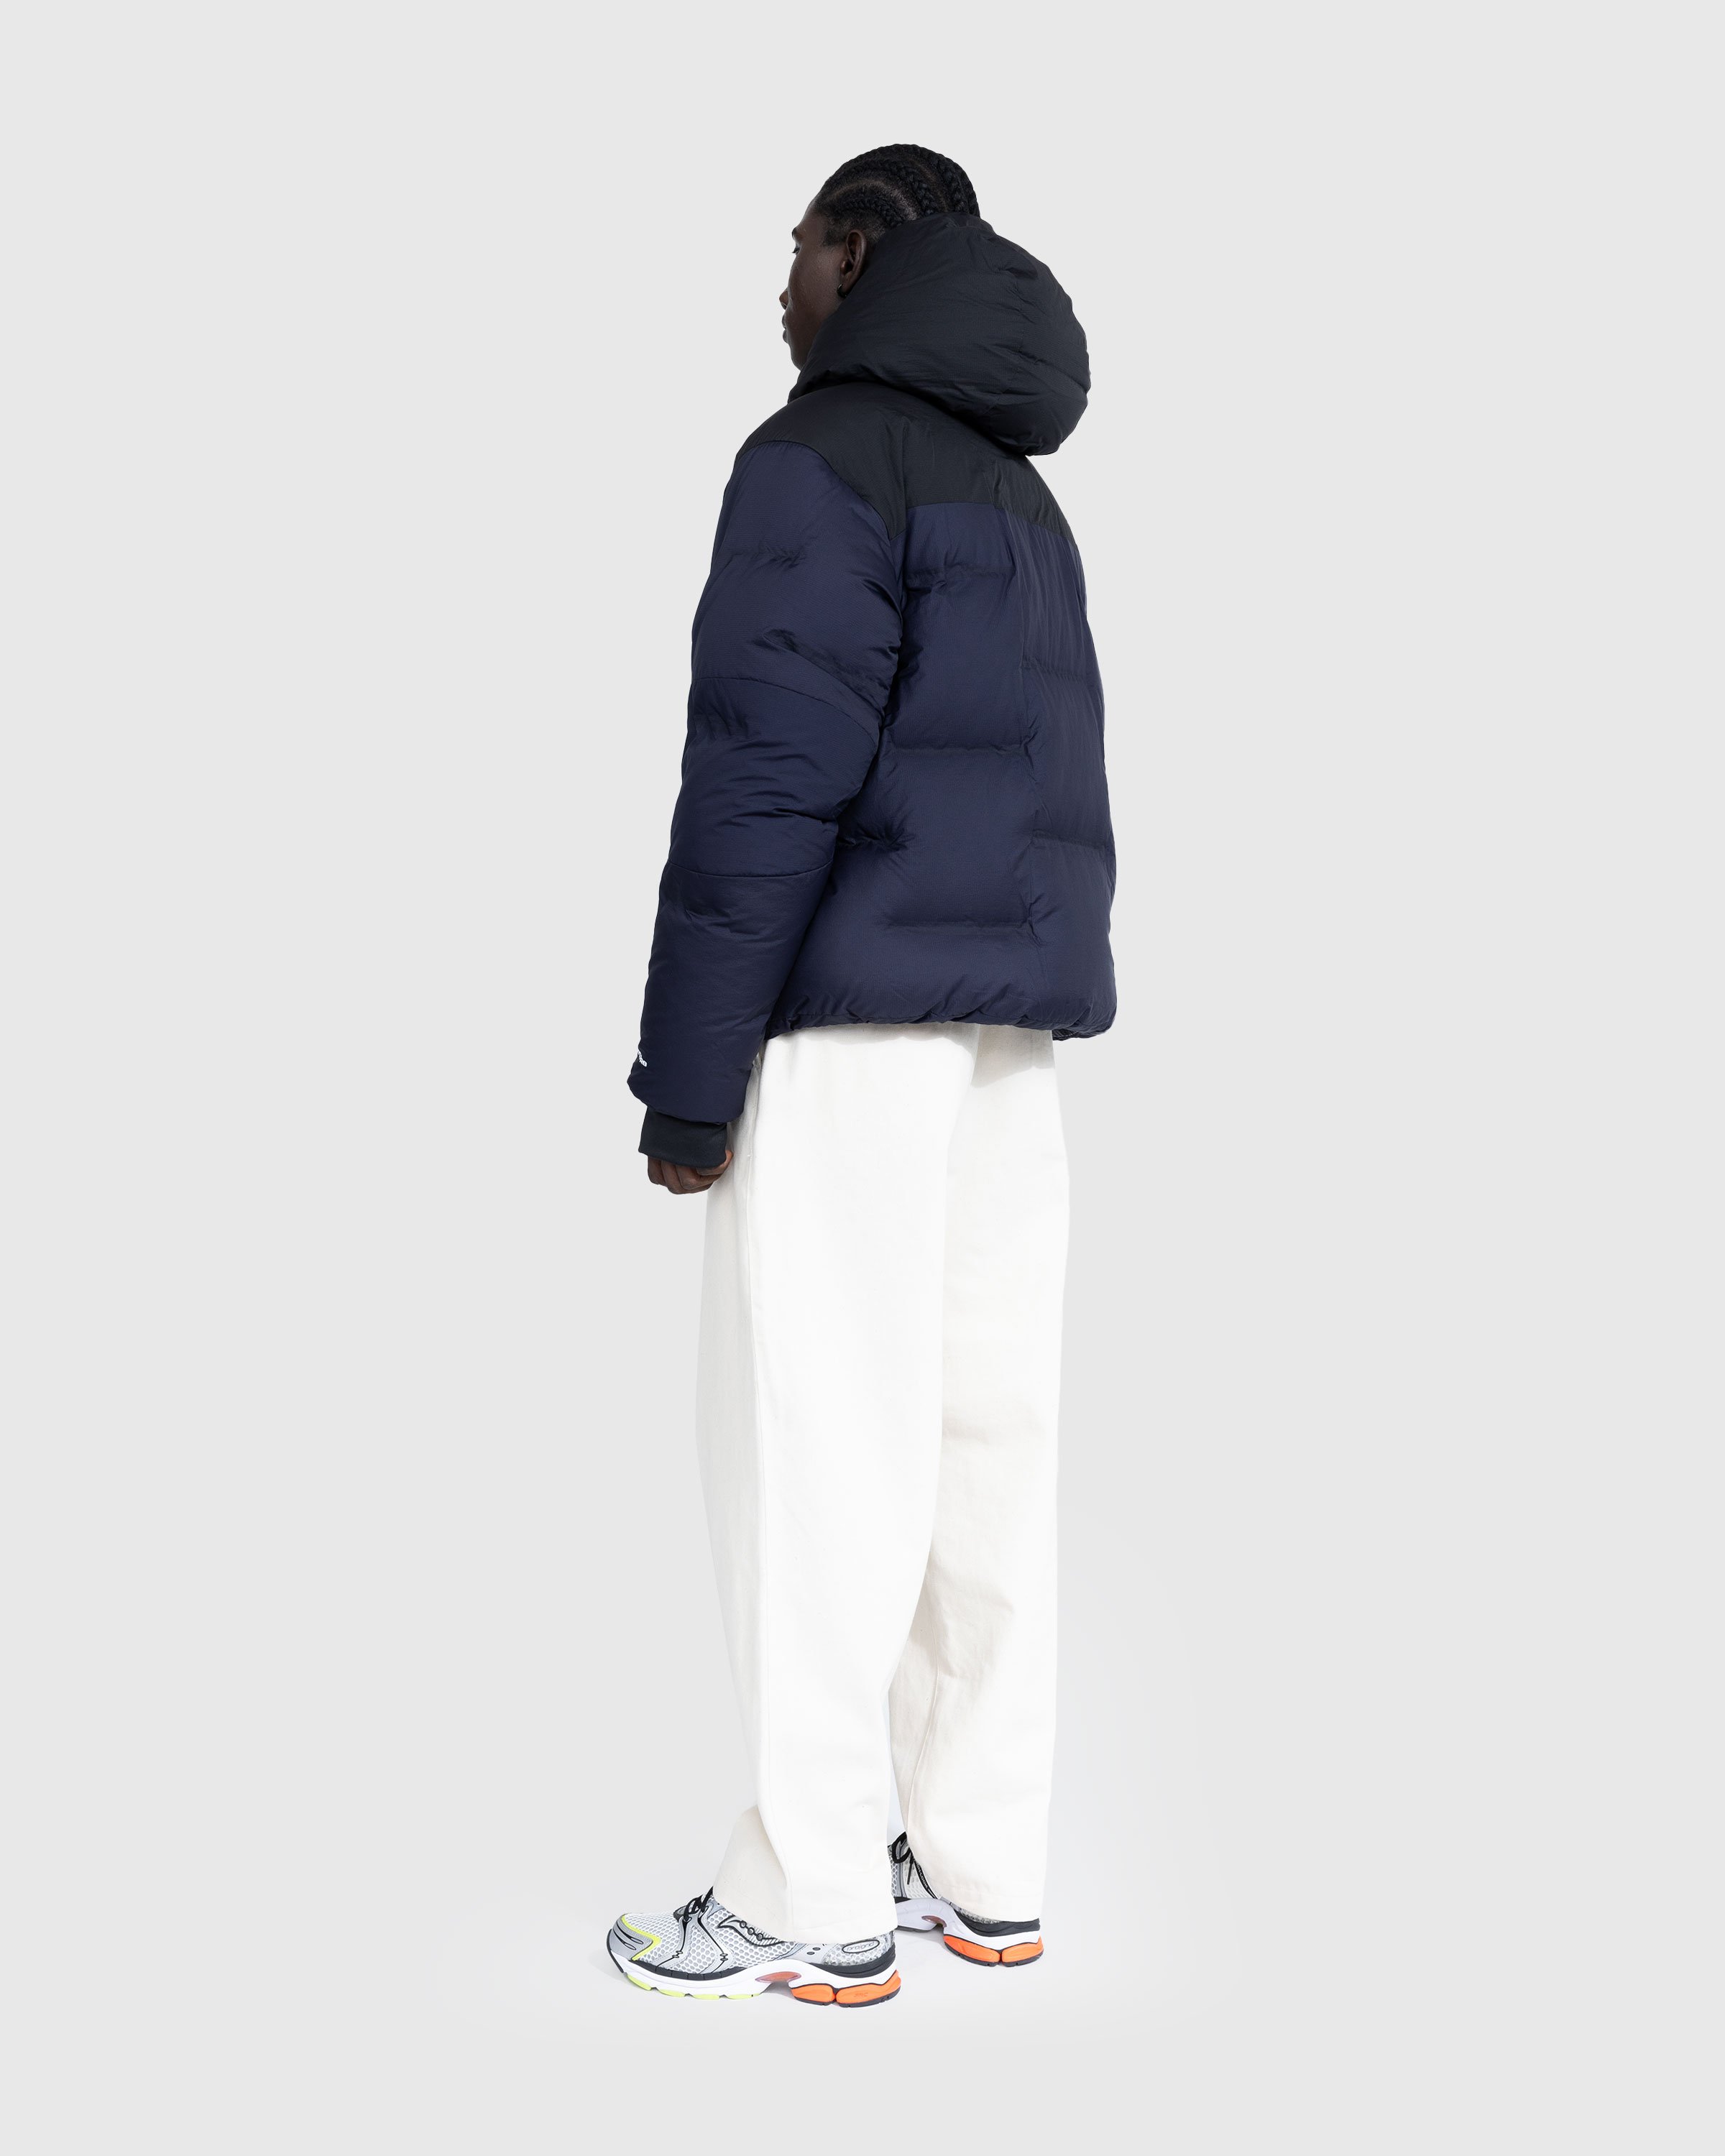 The North Face x UNDERCOVER - Soukuu Cloud Down Nupste Parka Black/Navy - Clothing - Multi - Image 4